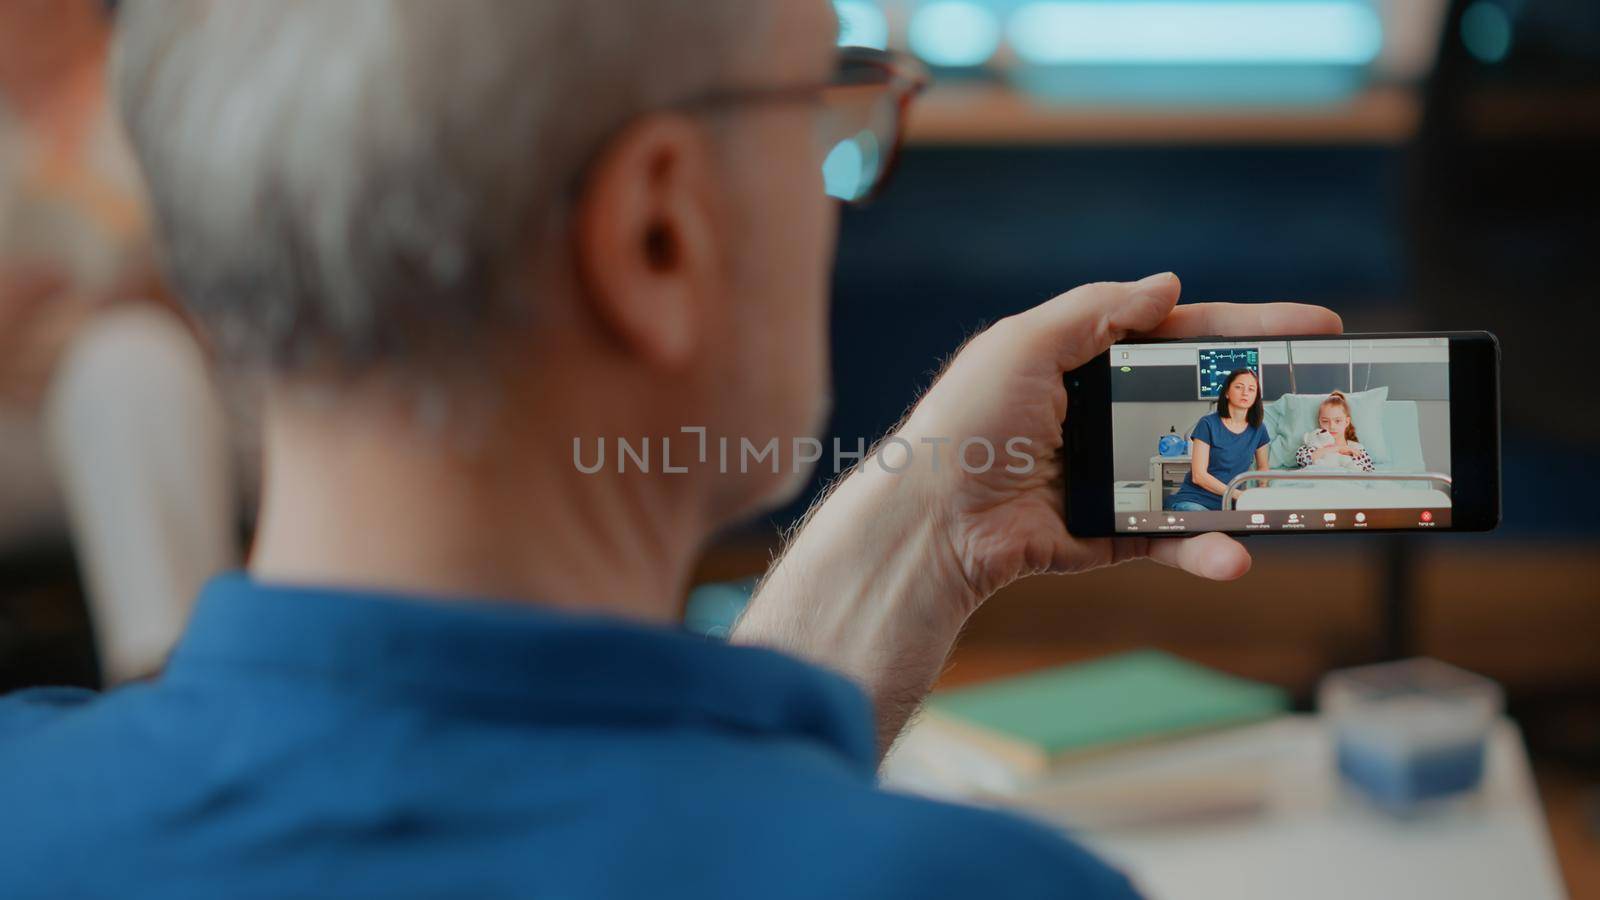 Retired adult using online video call on mobile phone, talking to relatives in hospital. Older man holding smartphone with video teleconference for remote communication with family.